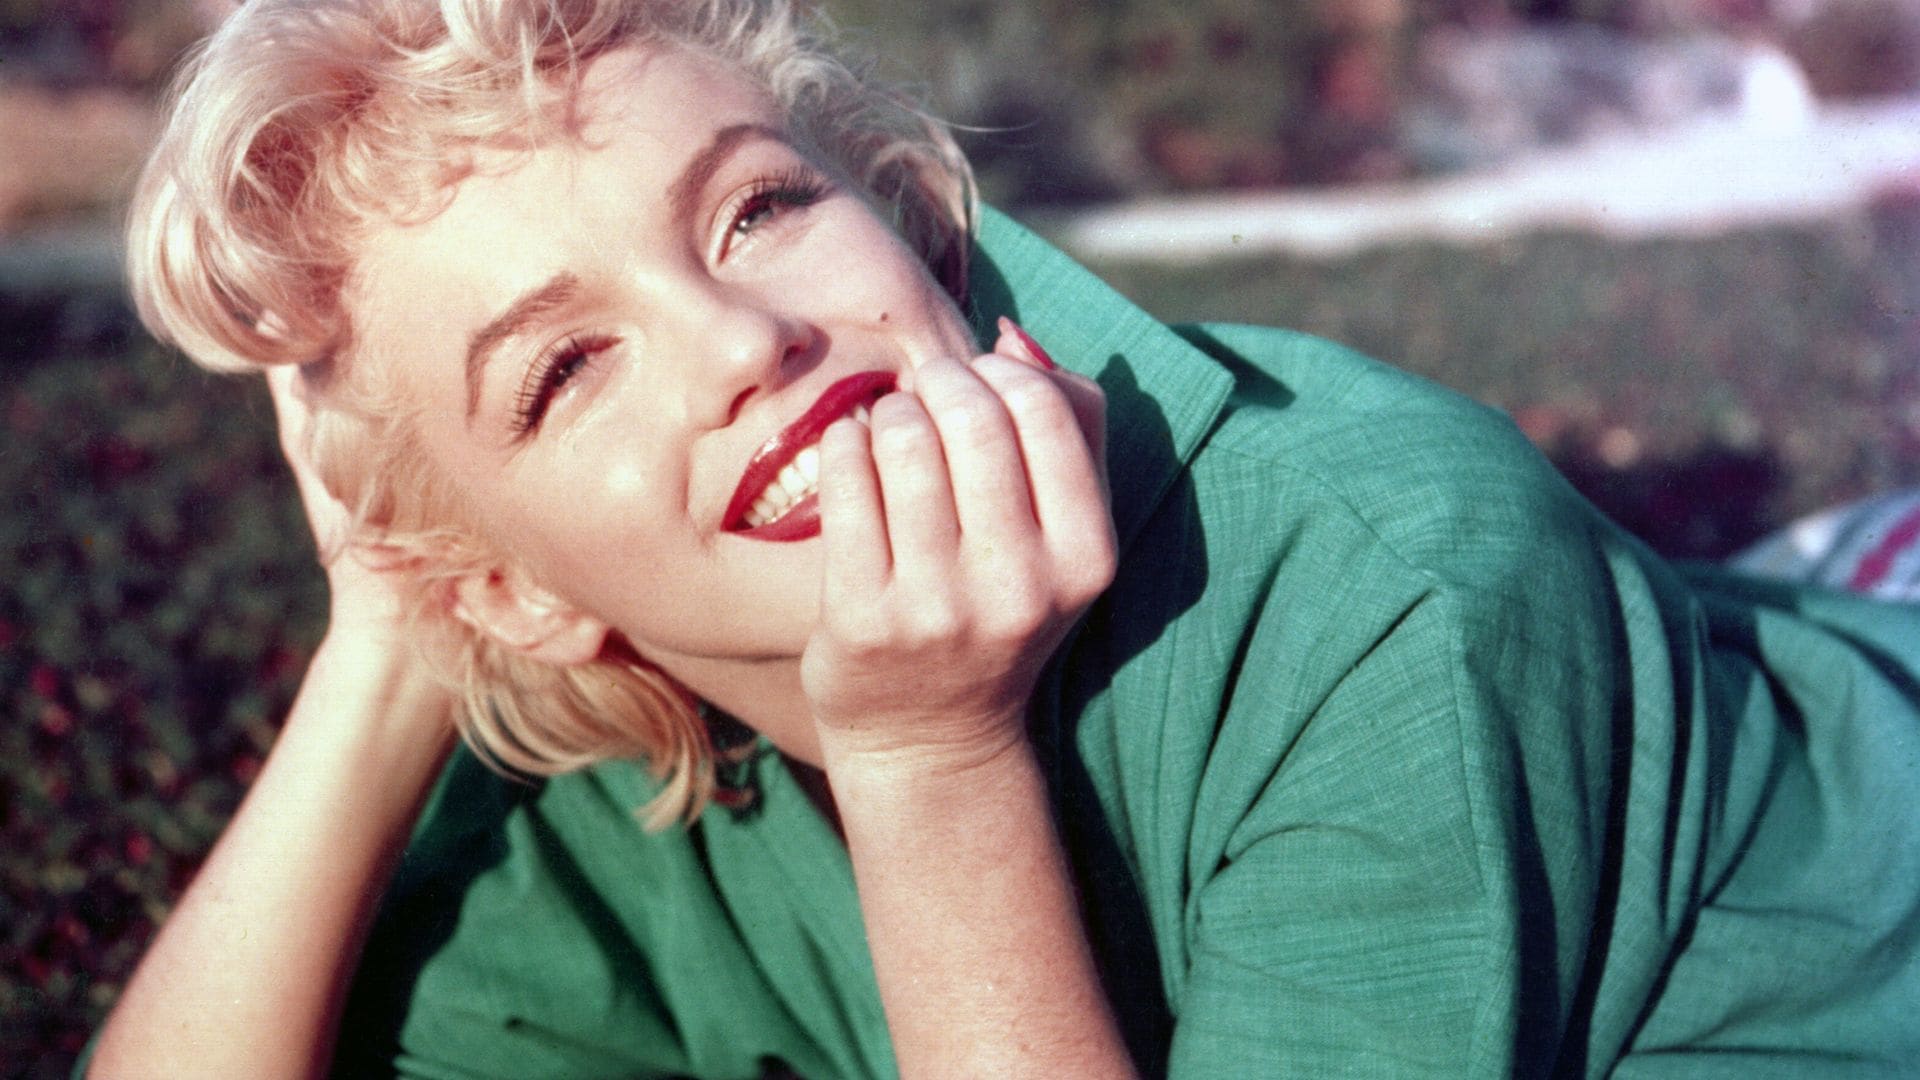 Marilyn Monroe's home saved from demolition and designated as a cultural monument